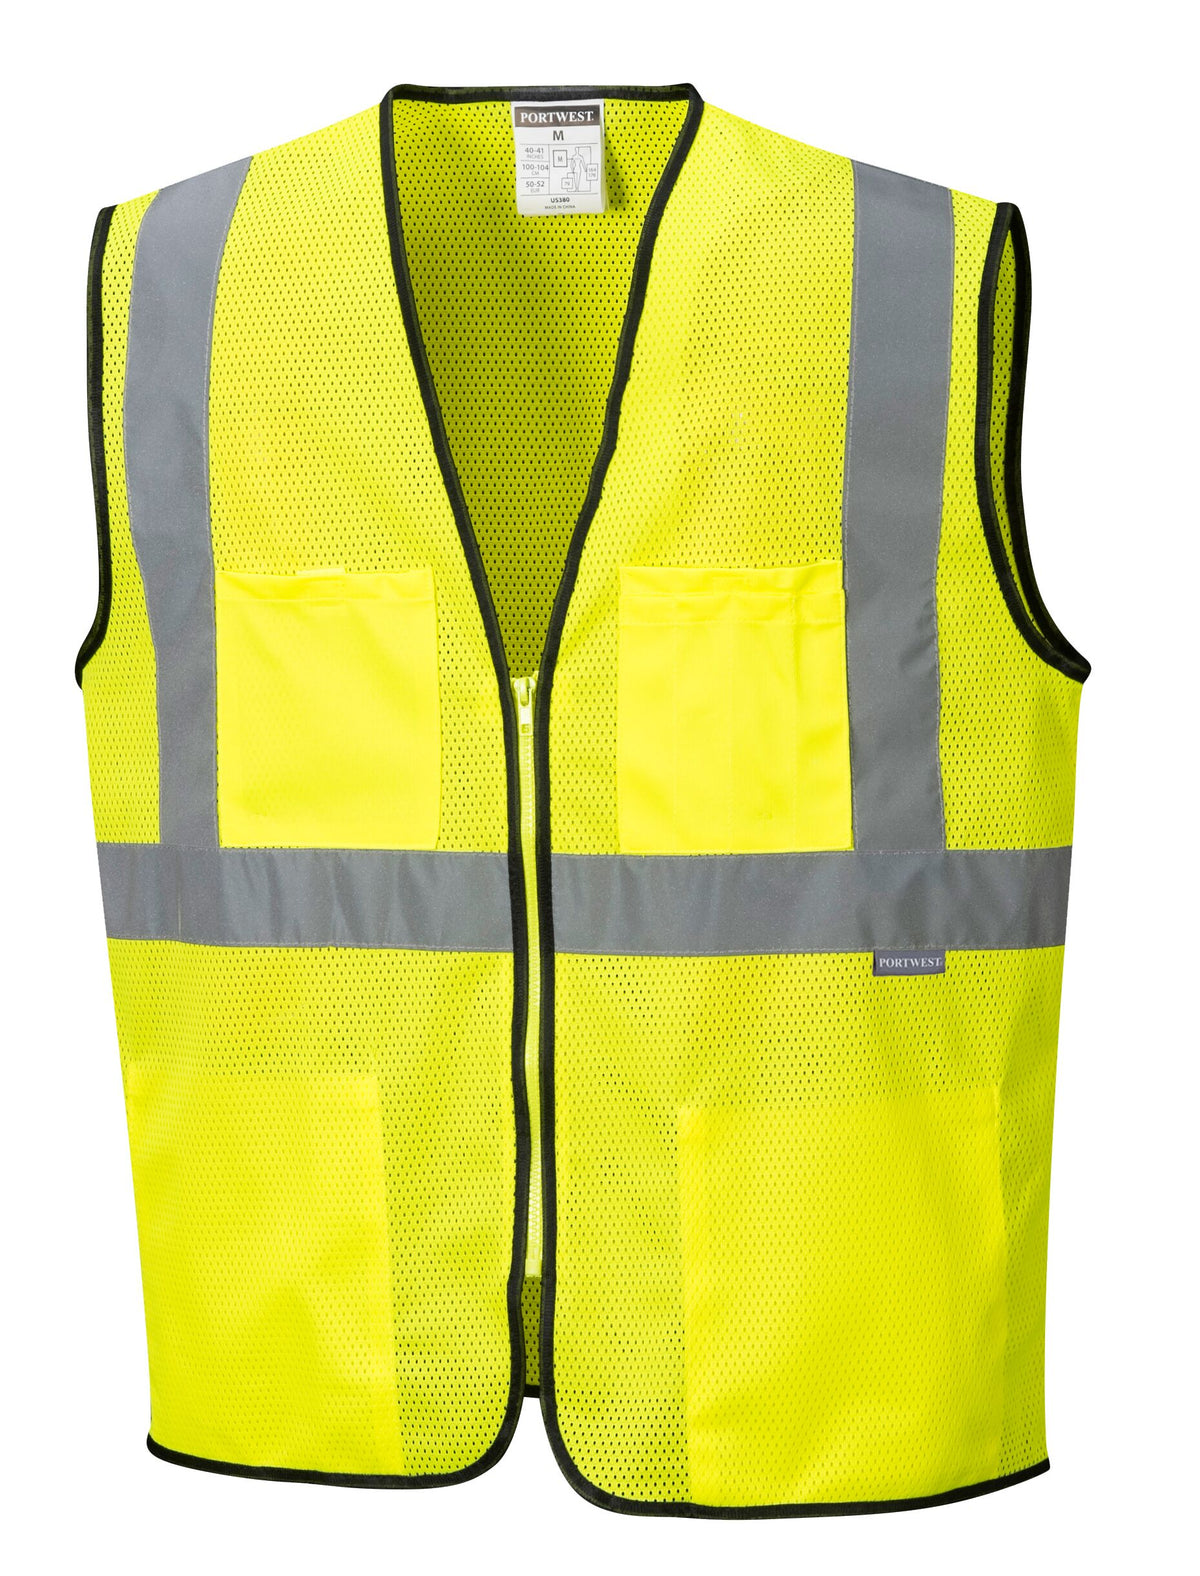 Tampa Mesh Vest - Safety Ansi Class 2 - High Visibility